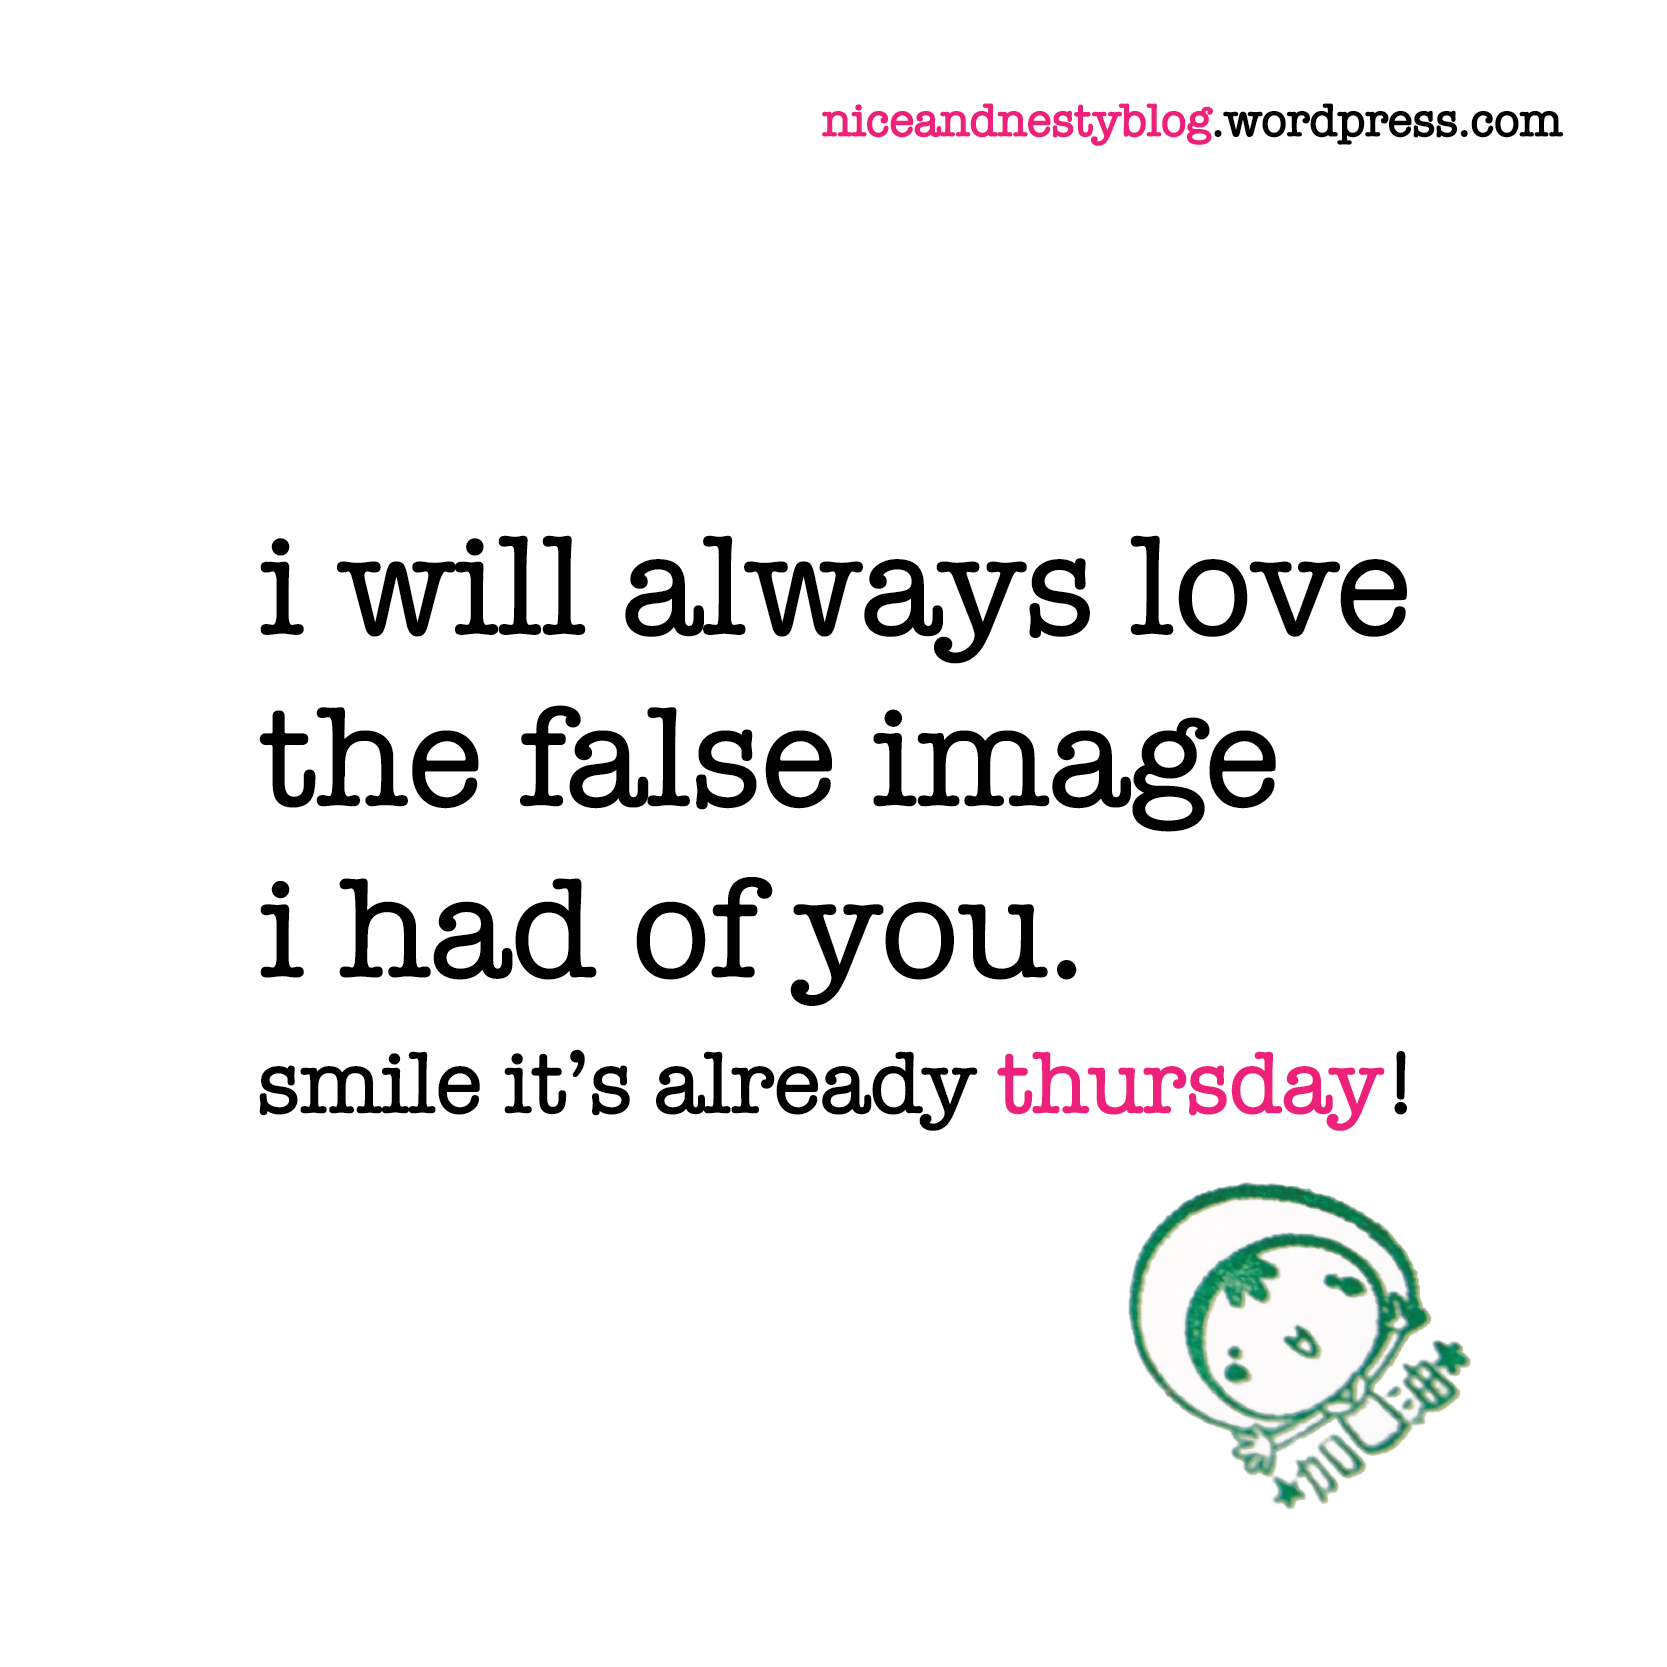 i will always love the false image i had of you thursday quote